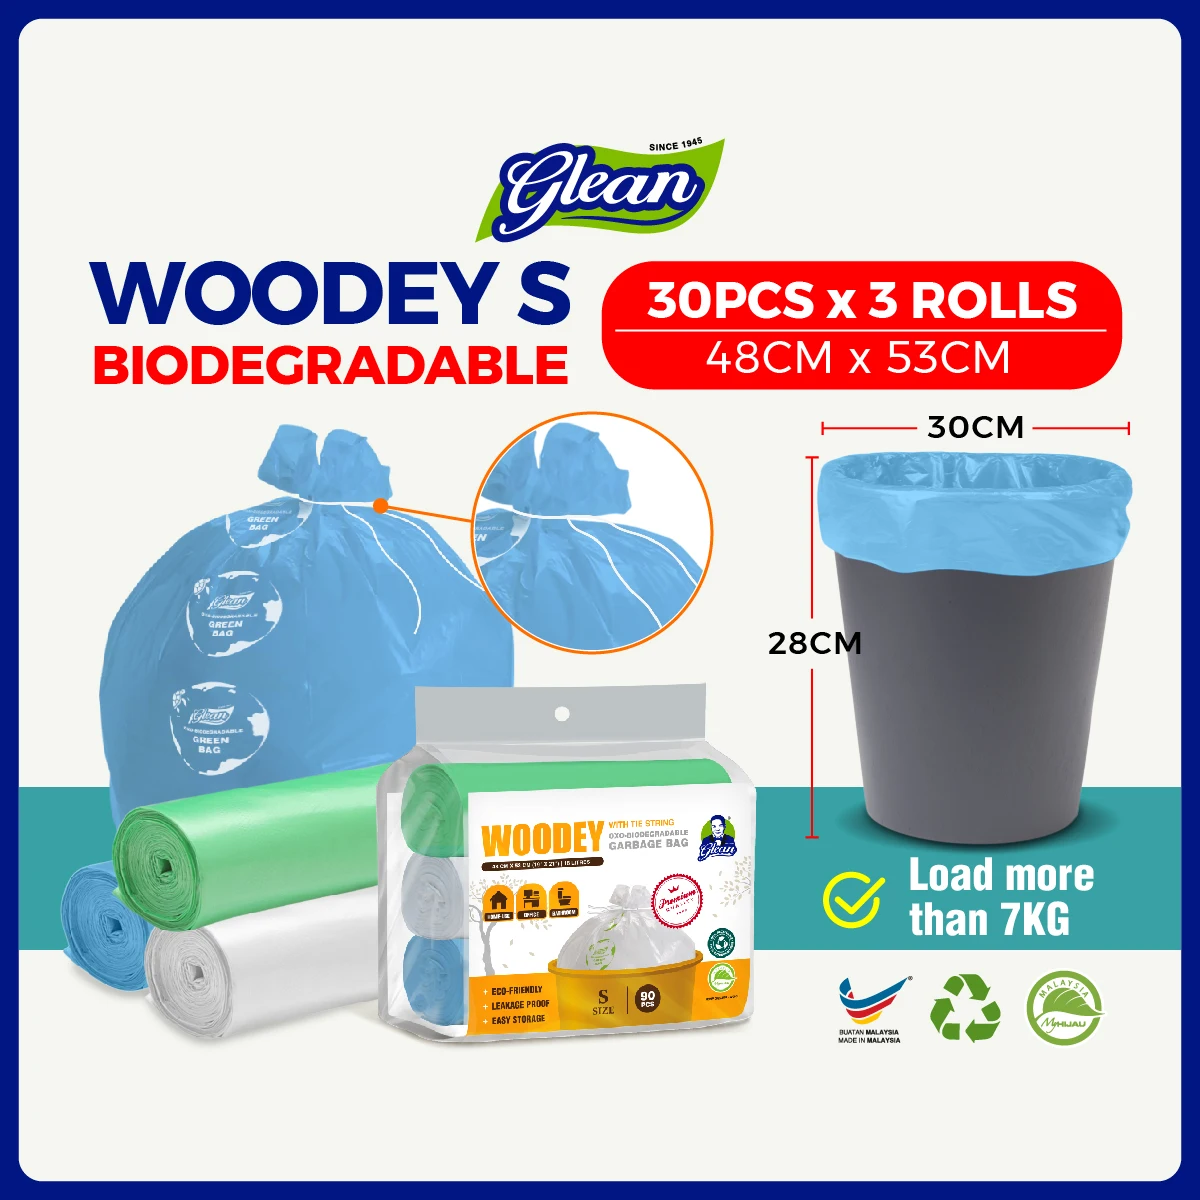 RACCOON WASTAGE BAGS BIODEGRADABLE  BIOMEDICAL WASTE  ECO FRIENDLY 3 ROLL  Small 7 L Garbage Bag Price in India  Buy RACCOON WASTAGE BAGS  BIODEGRADABLE  BIOMEDICAL WASTE  ECO FRIENDLY